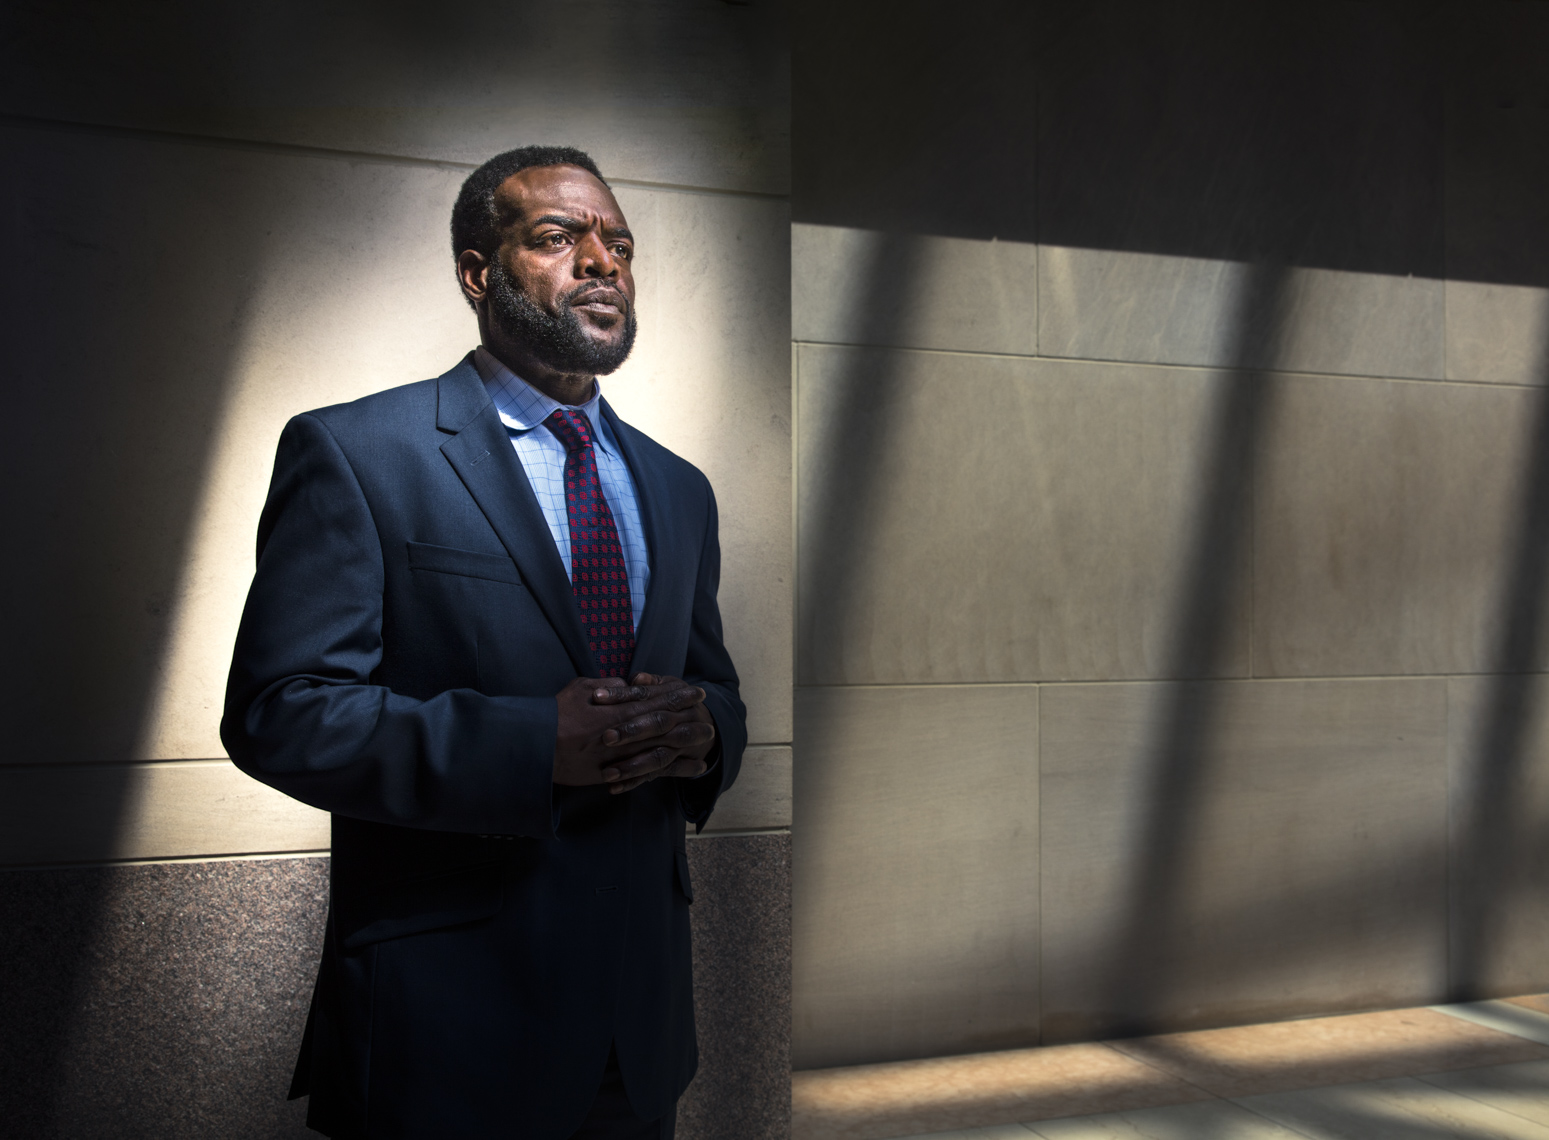 Portrait of a man in a business suit surrounded by shadows  by Washington DC photographer Ryan Donnell